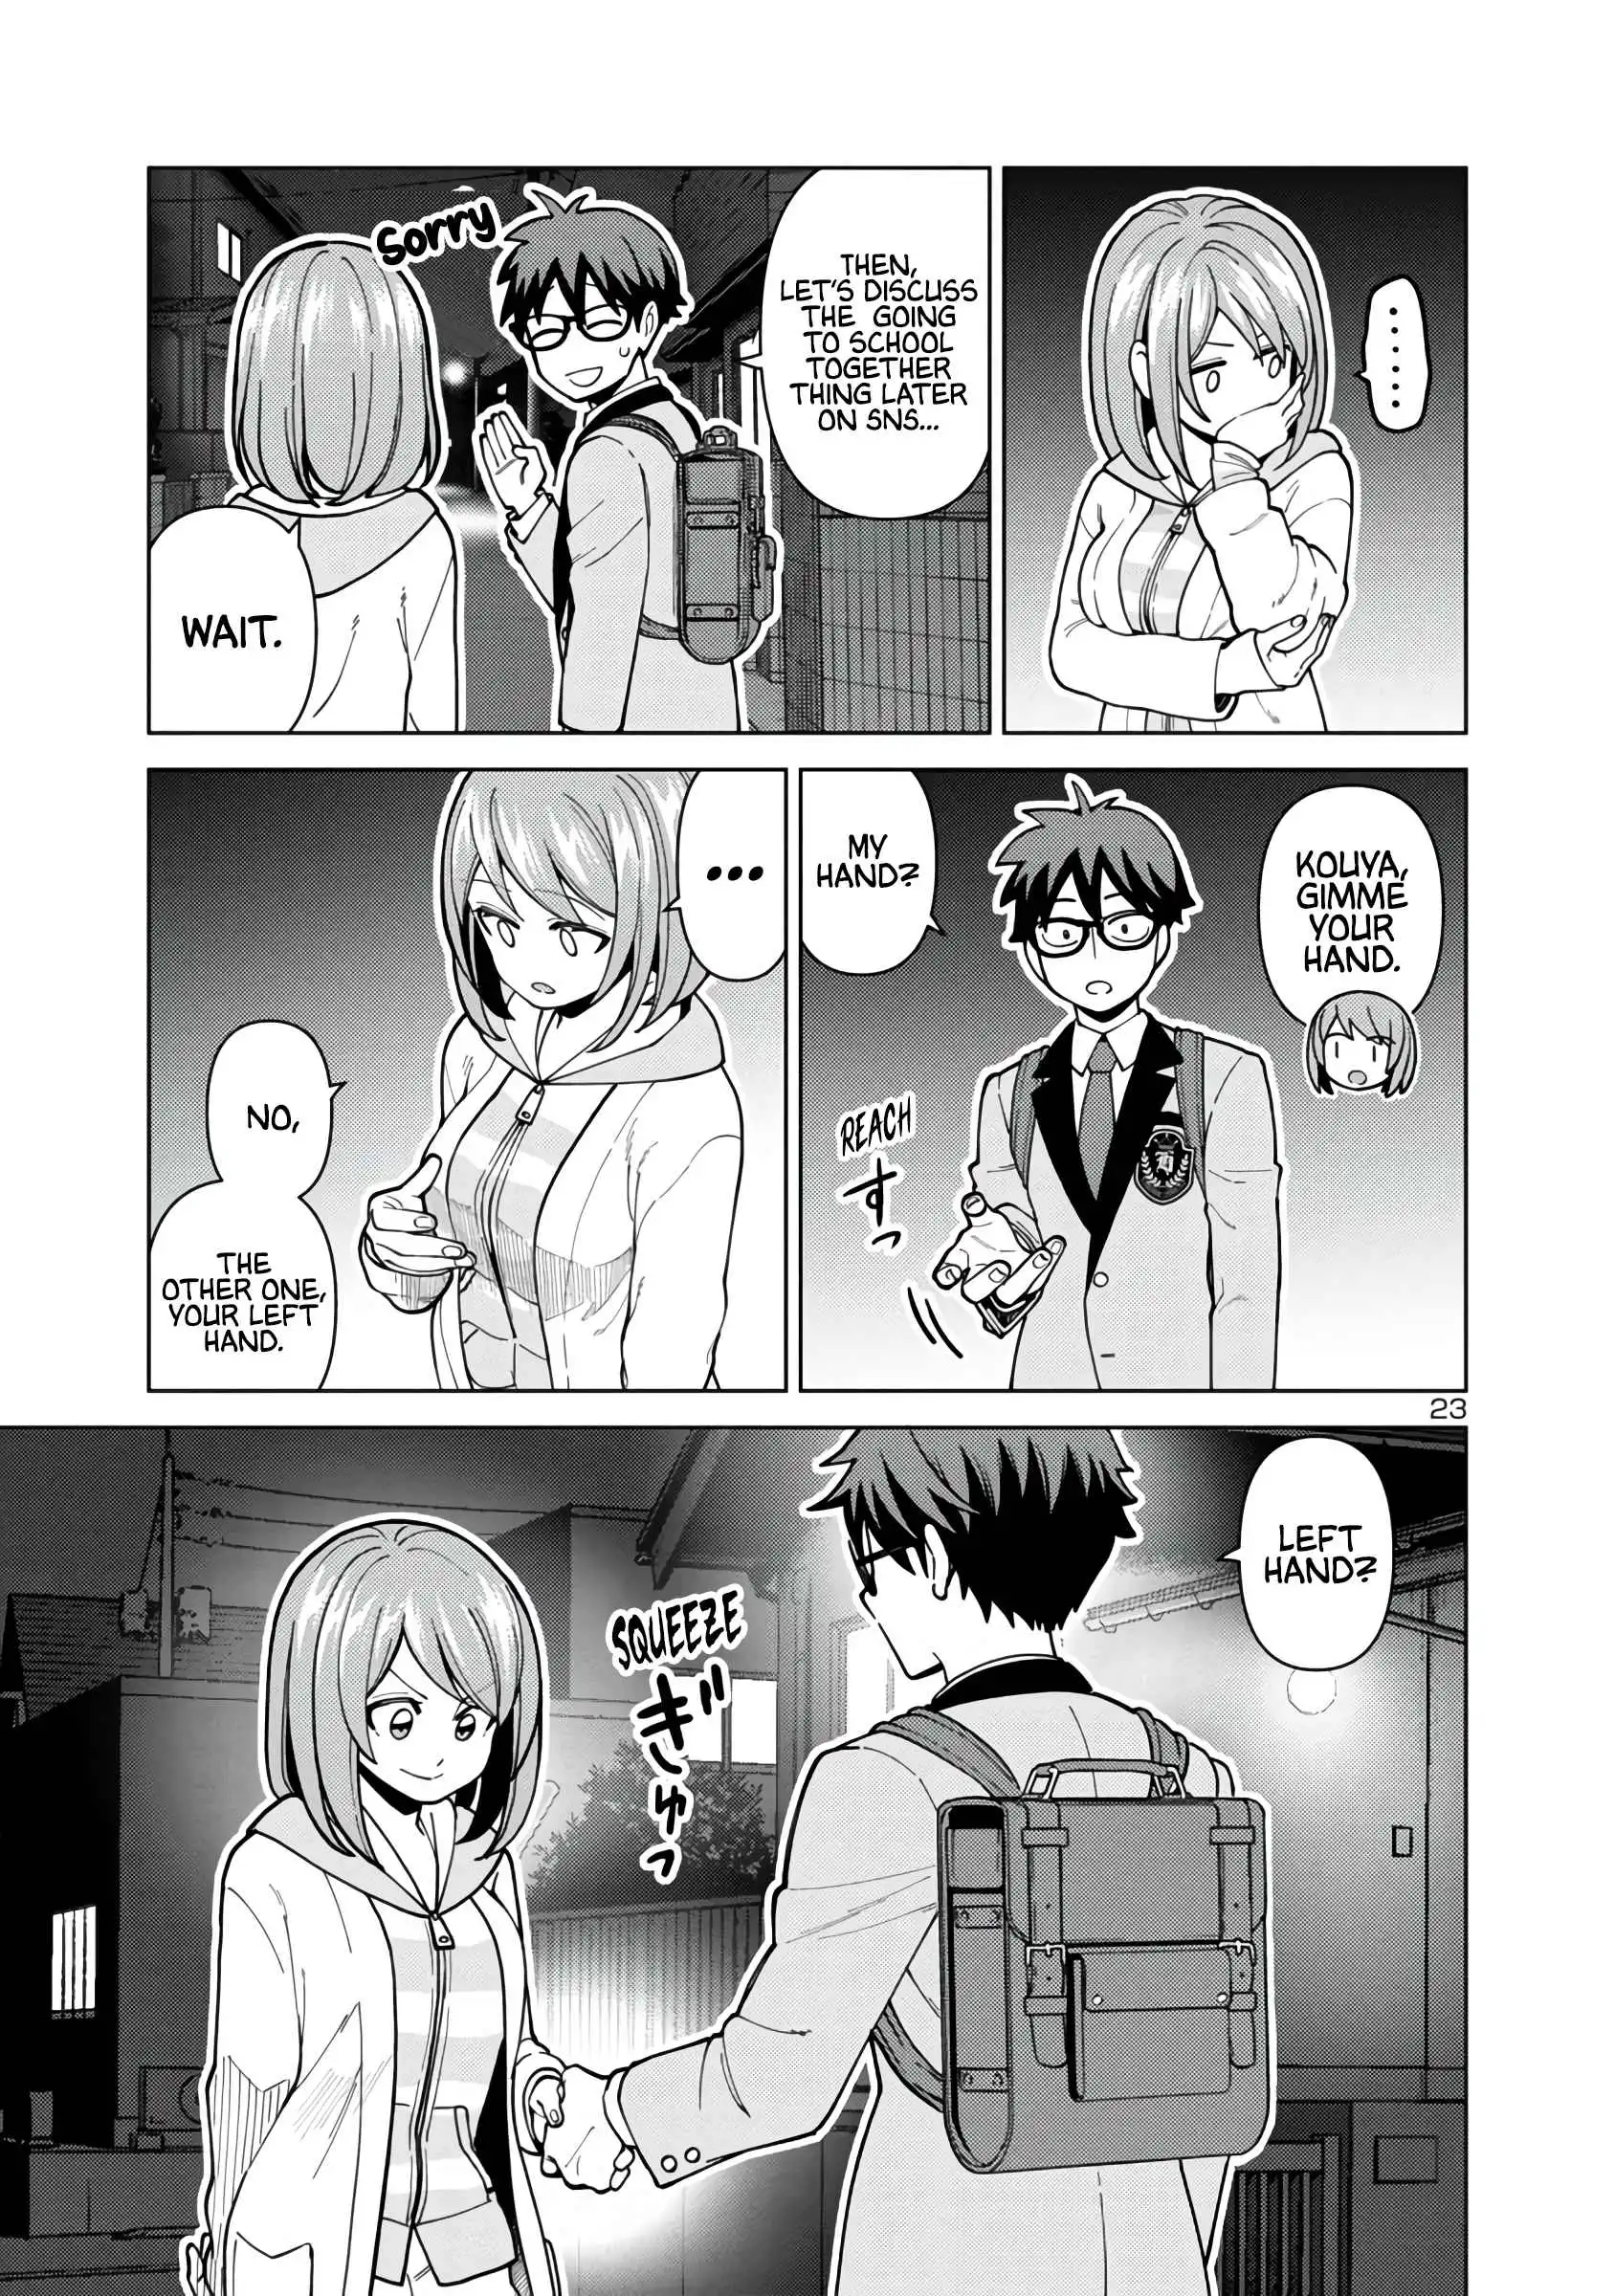 Still, I Want to Make You Happy [ALL CHAPTERS] Chapter 3